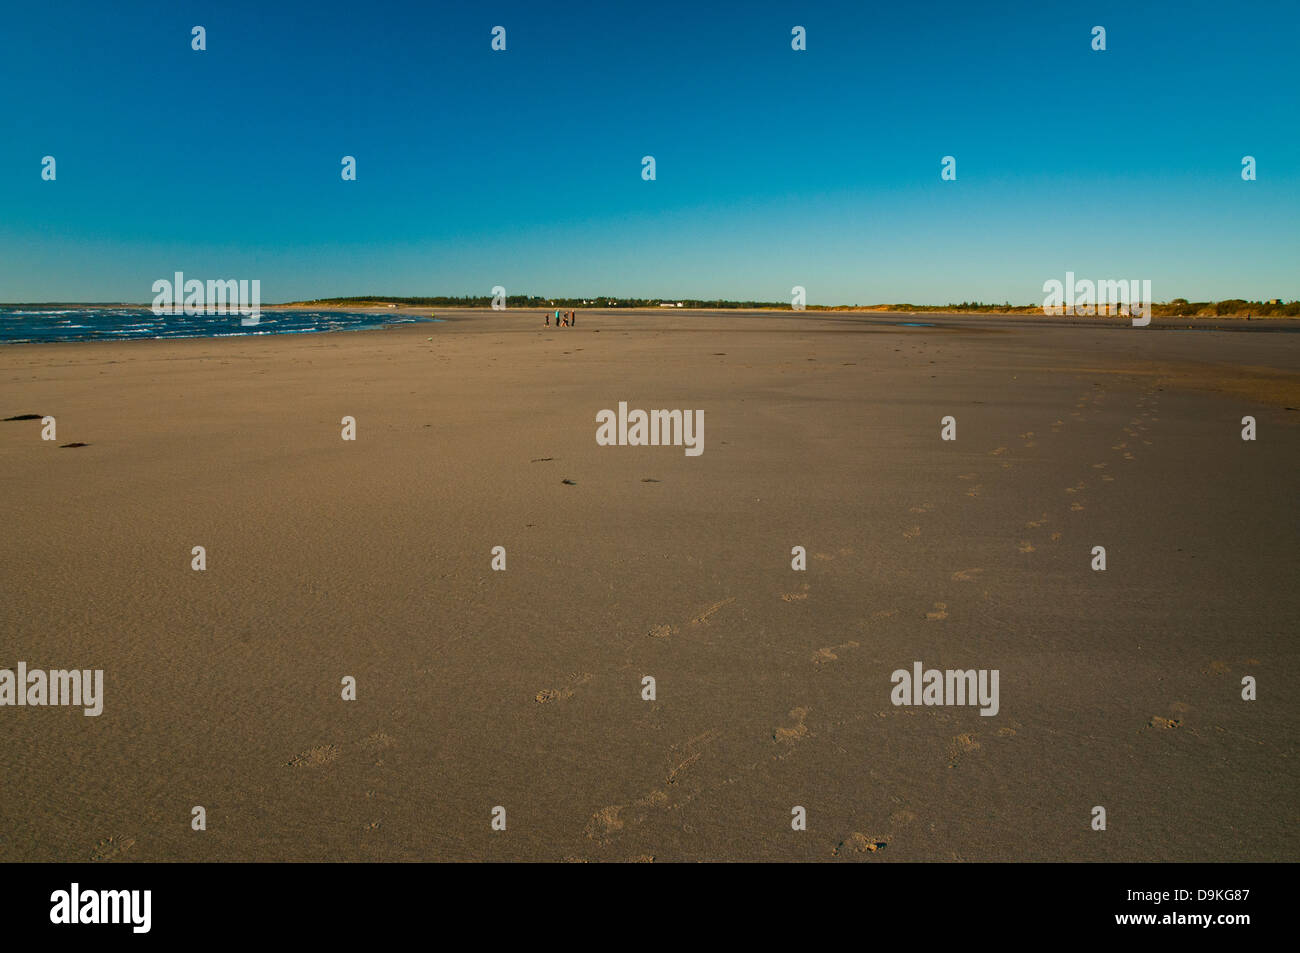 Nova Scotia`s expansive and uncrowded public access beaches,with distant people for scale Stock Photo